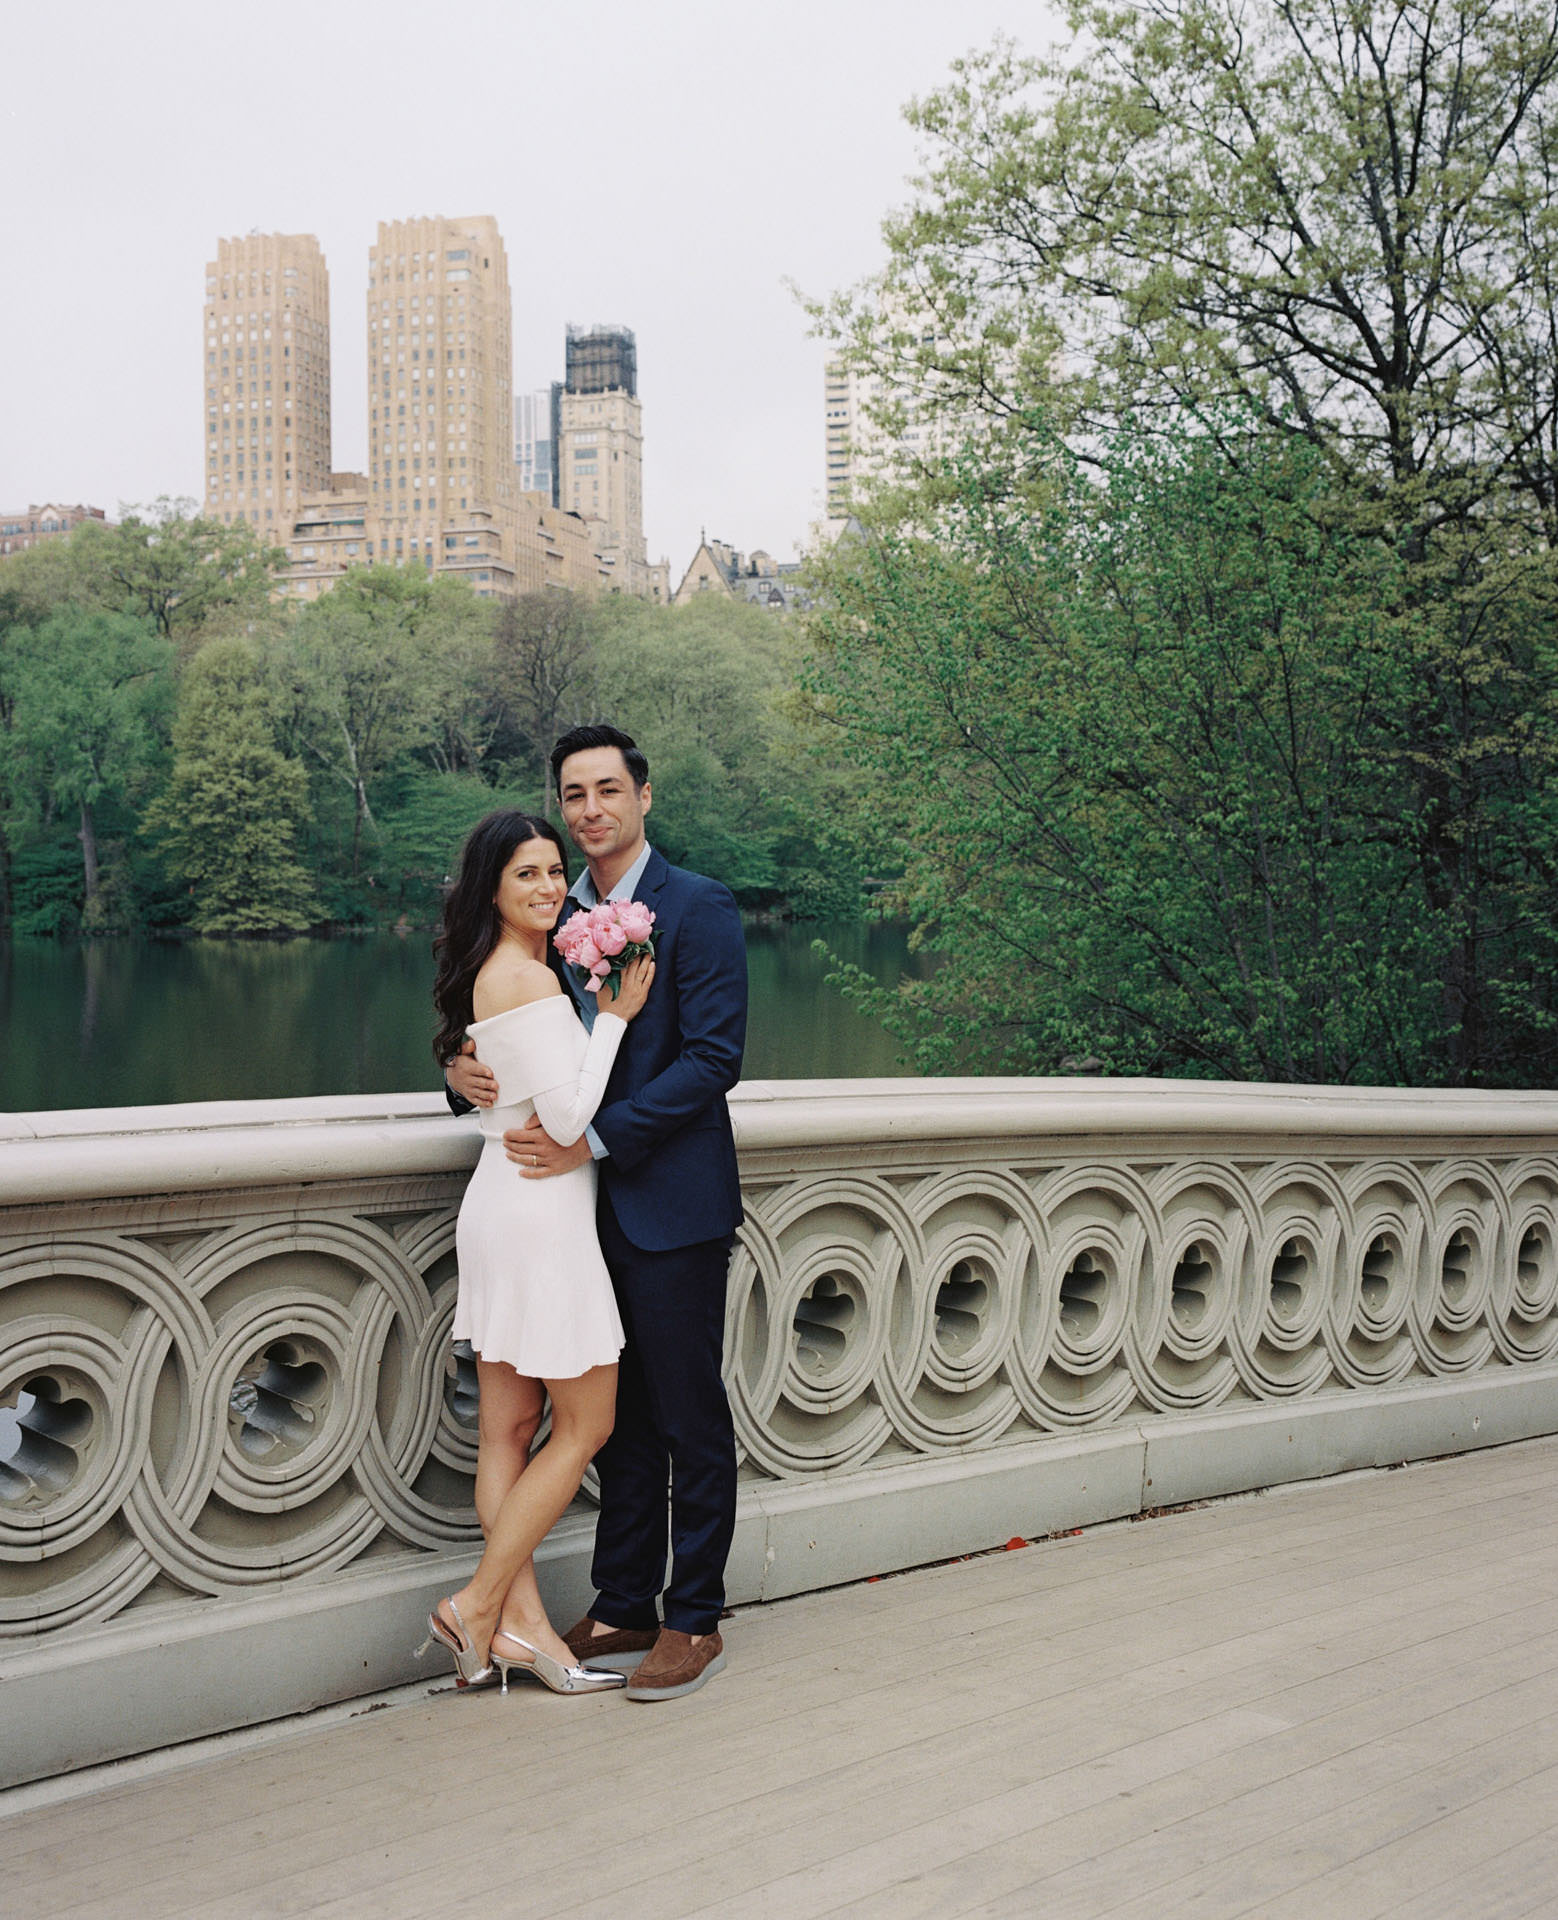 An engaged couple standing on Bow Bridge, with the picturesque New York City skyline in the distance.